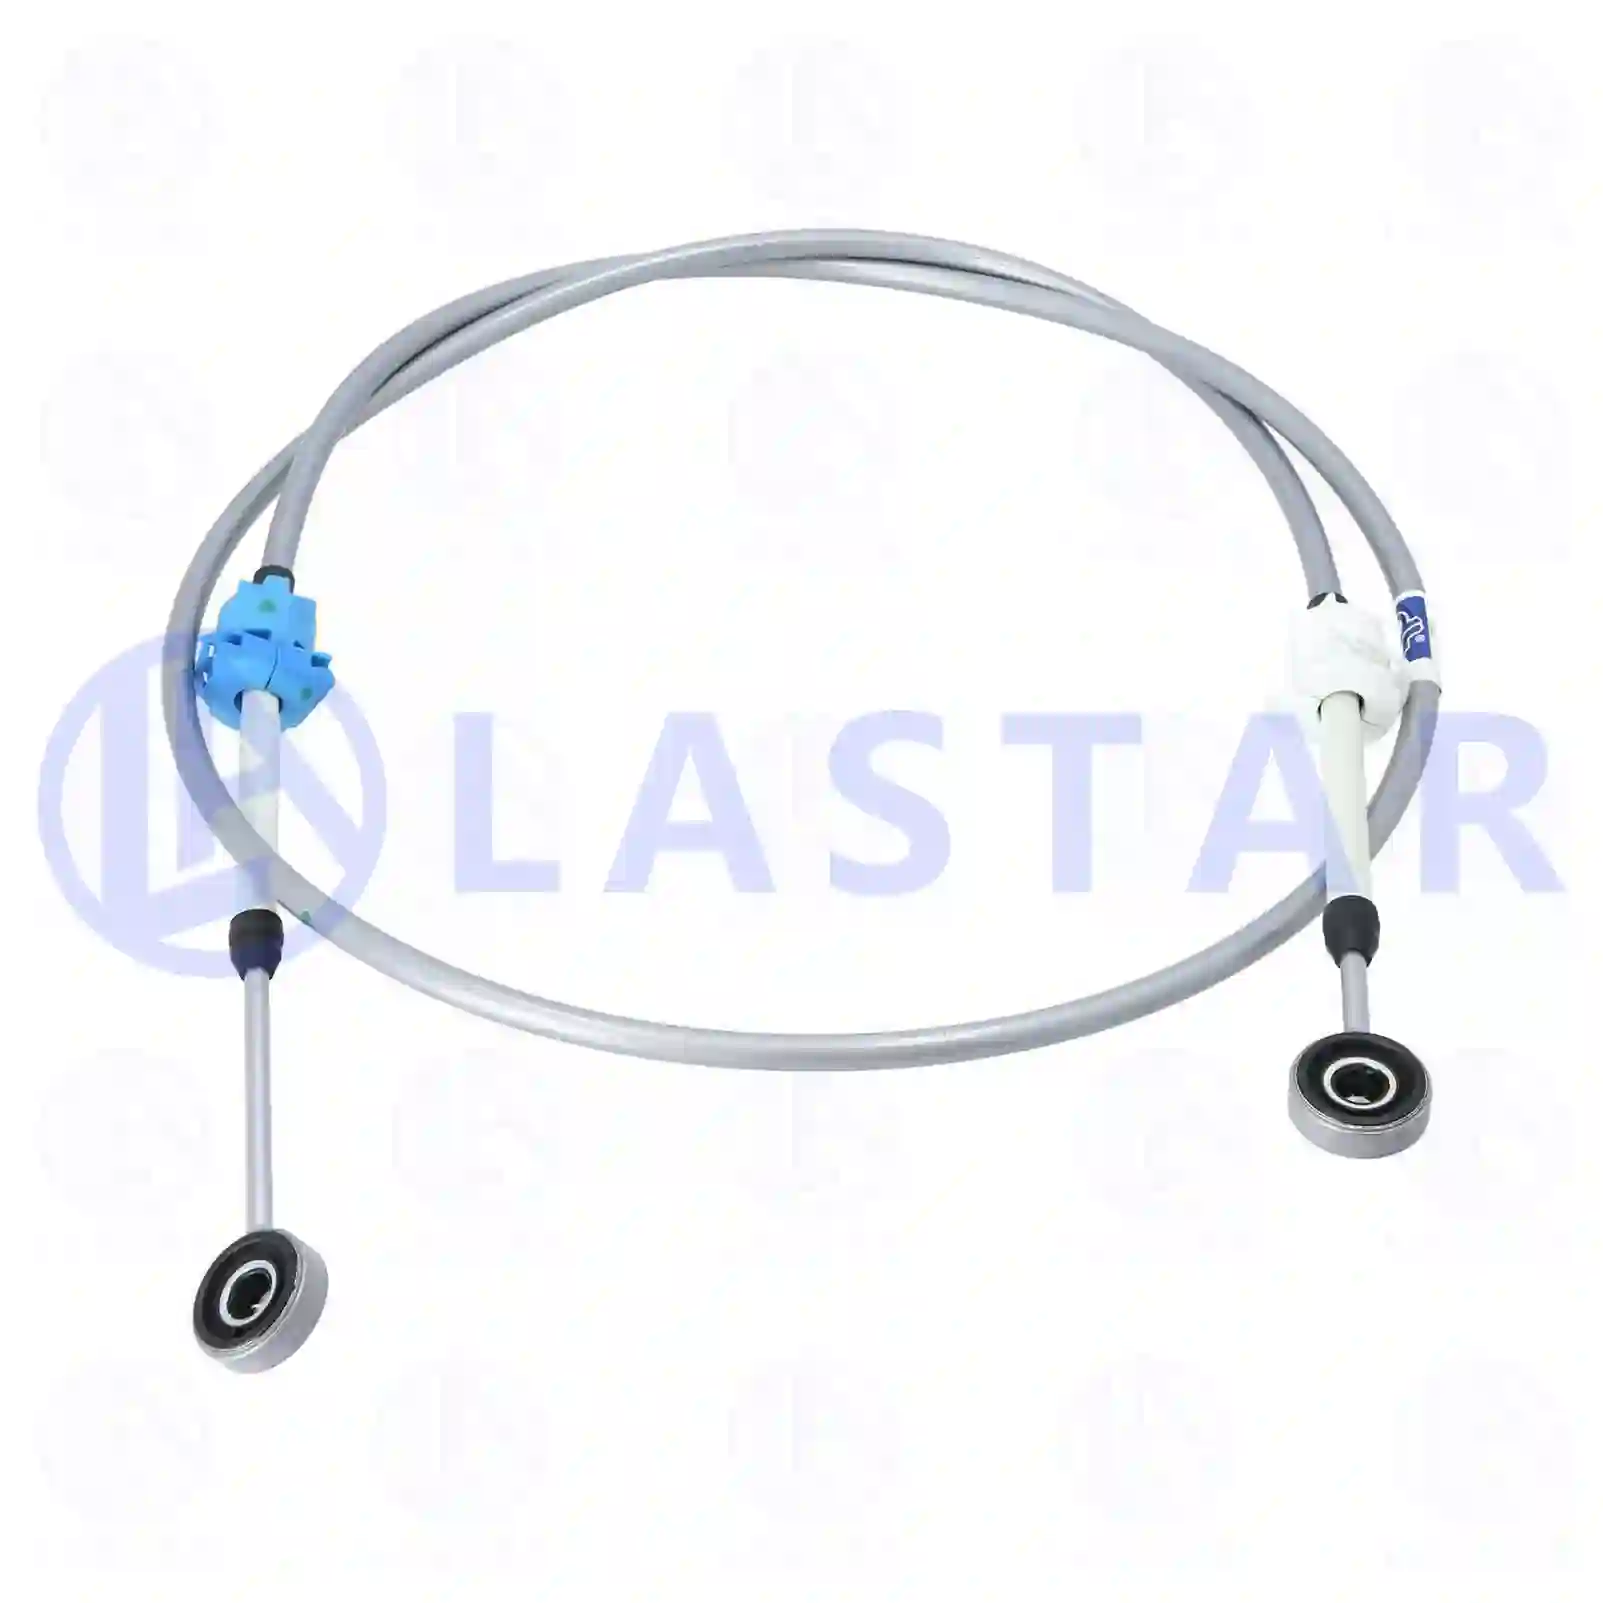 Control cable, switching, 77732436, 20700973, 21002873, 21343573, 21789697 ||  77732436 Lastar Spare Part | Truck Spare Parts, Auotomotive Spare Parts Control cable, switching, 77732436, 20700973, 21002873, 21343573, 21789697 ||  77732436 Lastar Spare Part | Truck Spare Parts, Auotomotive Spare Parts